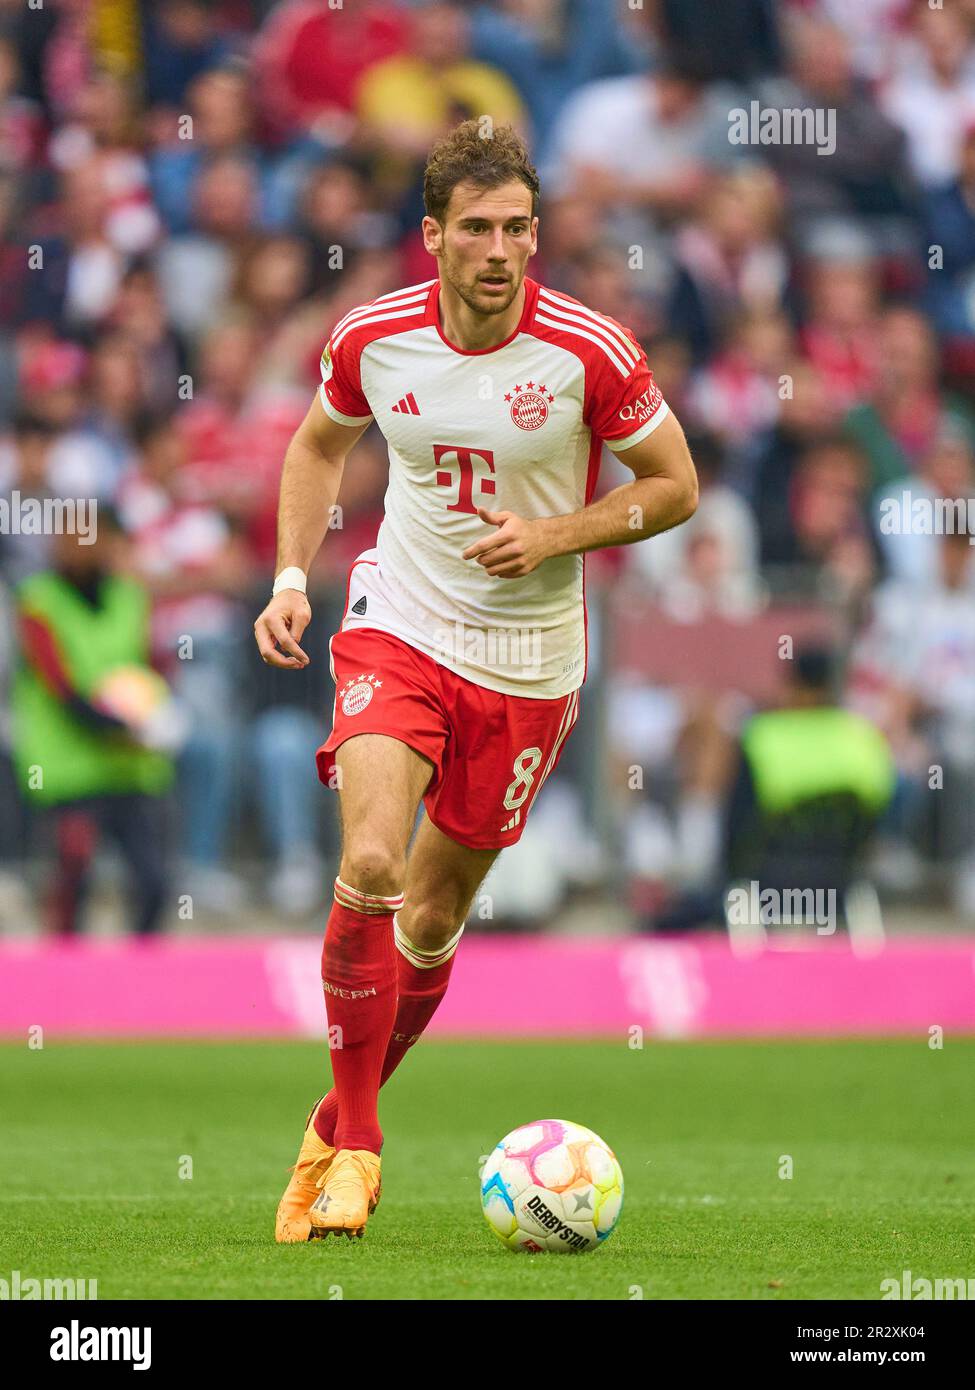 Leon GORETZKA, FCB 8  in the match FC BAYERN MUENCHEN - RB LEIPZIG 1-3 1.German Football League on May 20, 2023 in Munich, Germany. Season 2022/2023, matchday 33, 1.Bundesliga, FCB, München, 33.Spieltag. © Peter Schatz / Alamy Live News    - DFL REGULATIONS PROHIBIT ANY USE OF PHOTOGRAPHS as IMAGE SEQUENCES and/or QUASI-VIDEO - Stock Photo